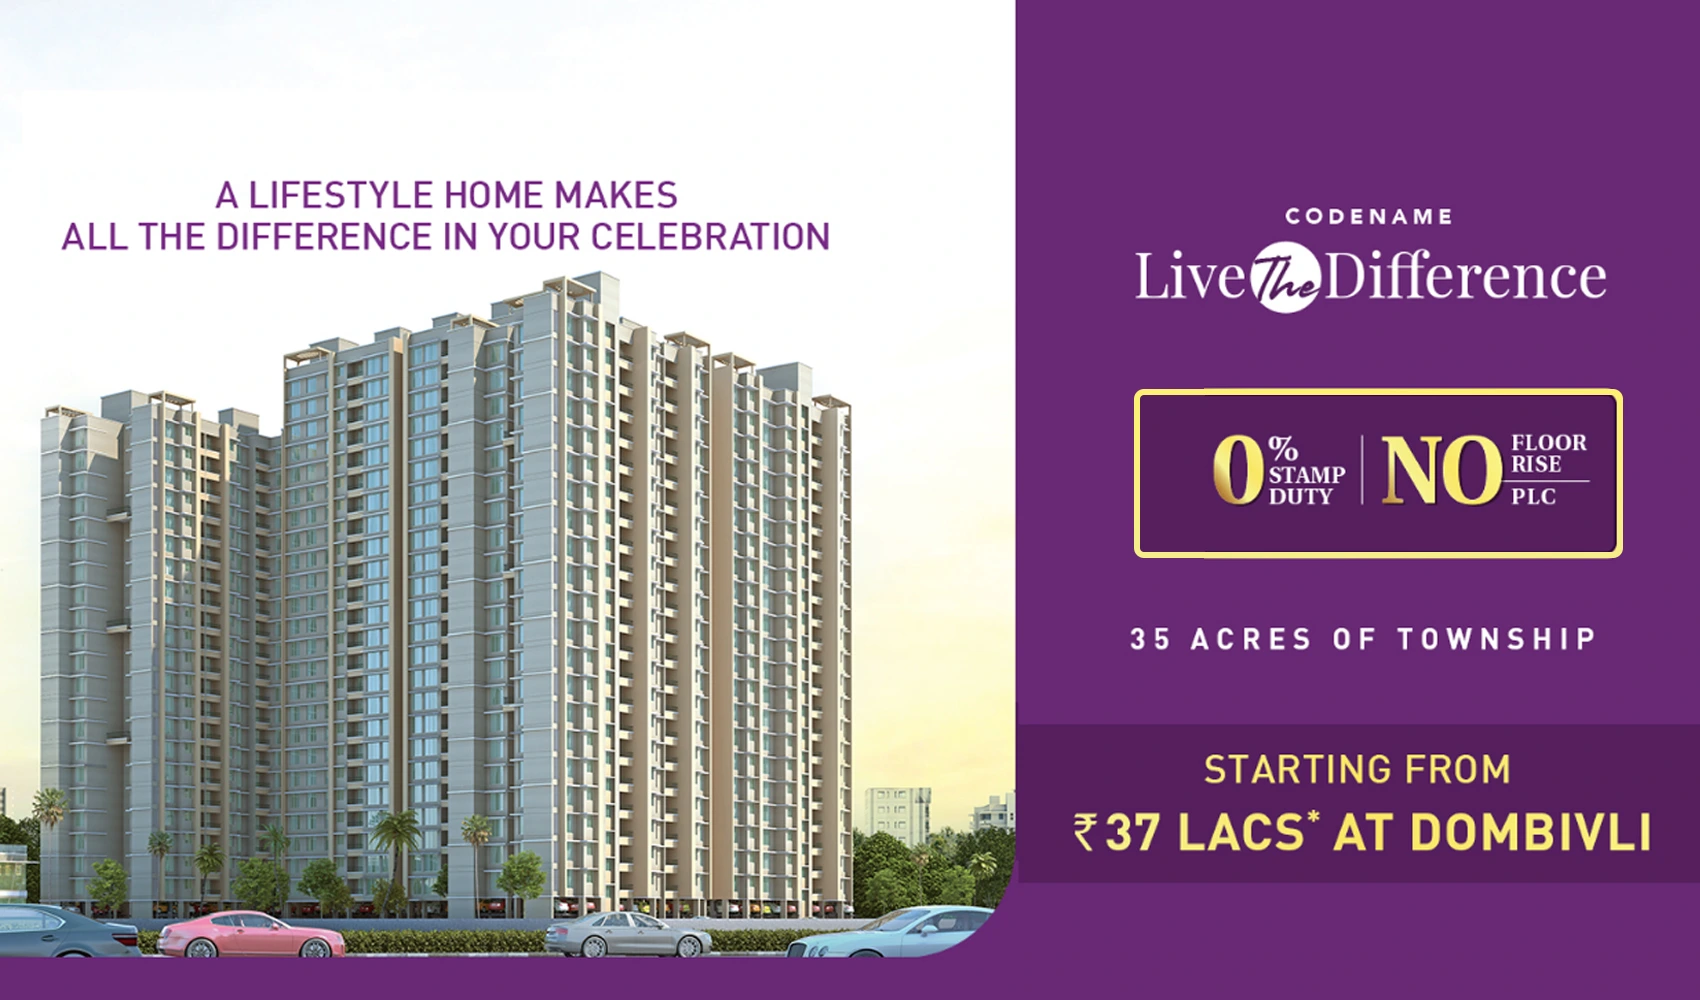 Tycoons Solitaire Project at Kalyan by Milestone Space